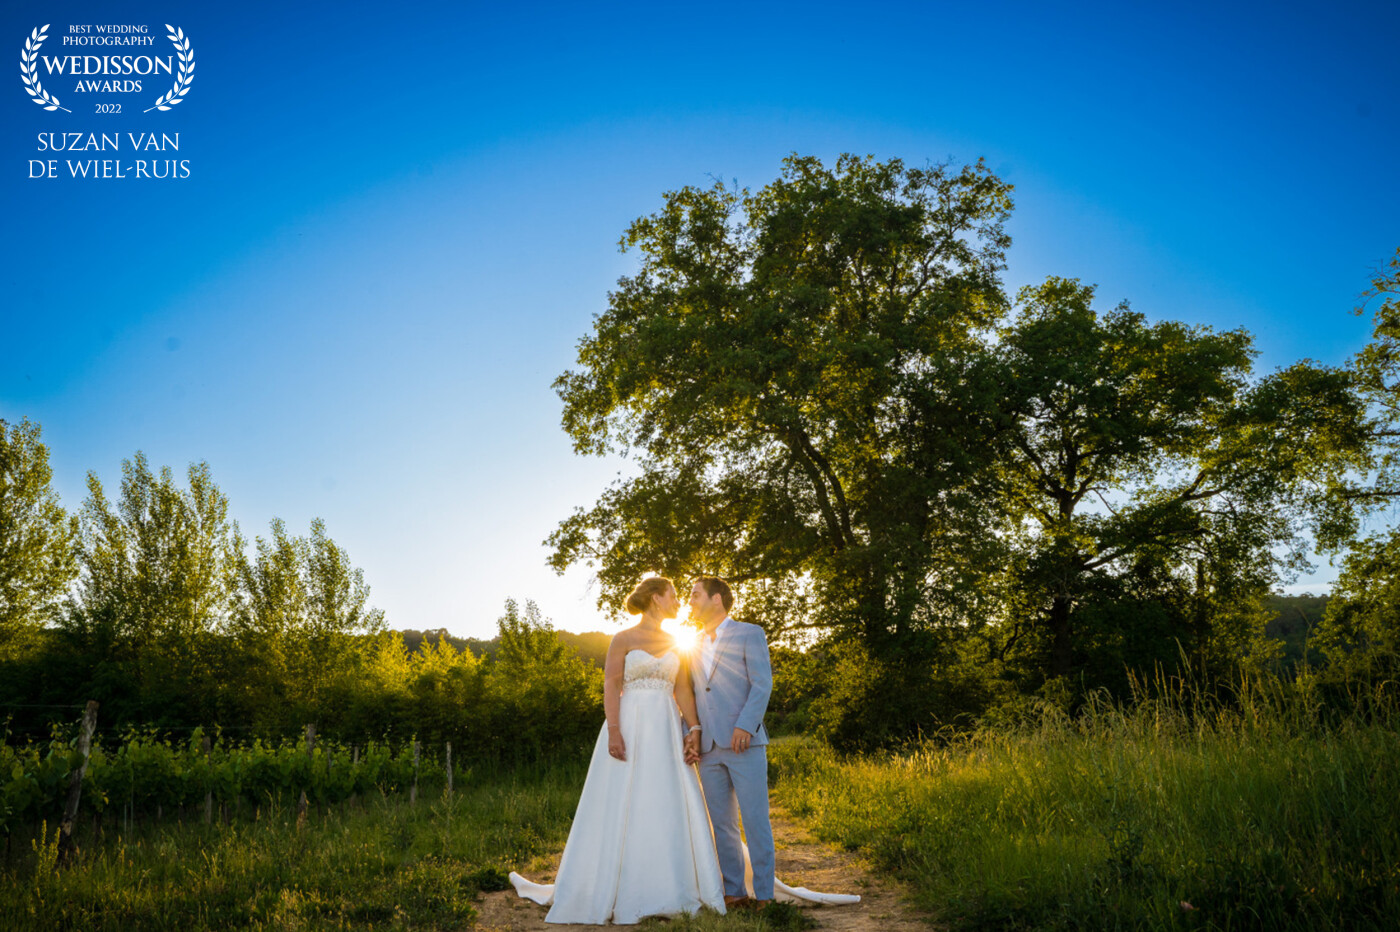 This was a beautiful destination wedding with an amazing couple at an incredible location in France. We saw this beautiful sunset and just had to take them away from their dinner to create some unforgettable photos!